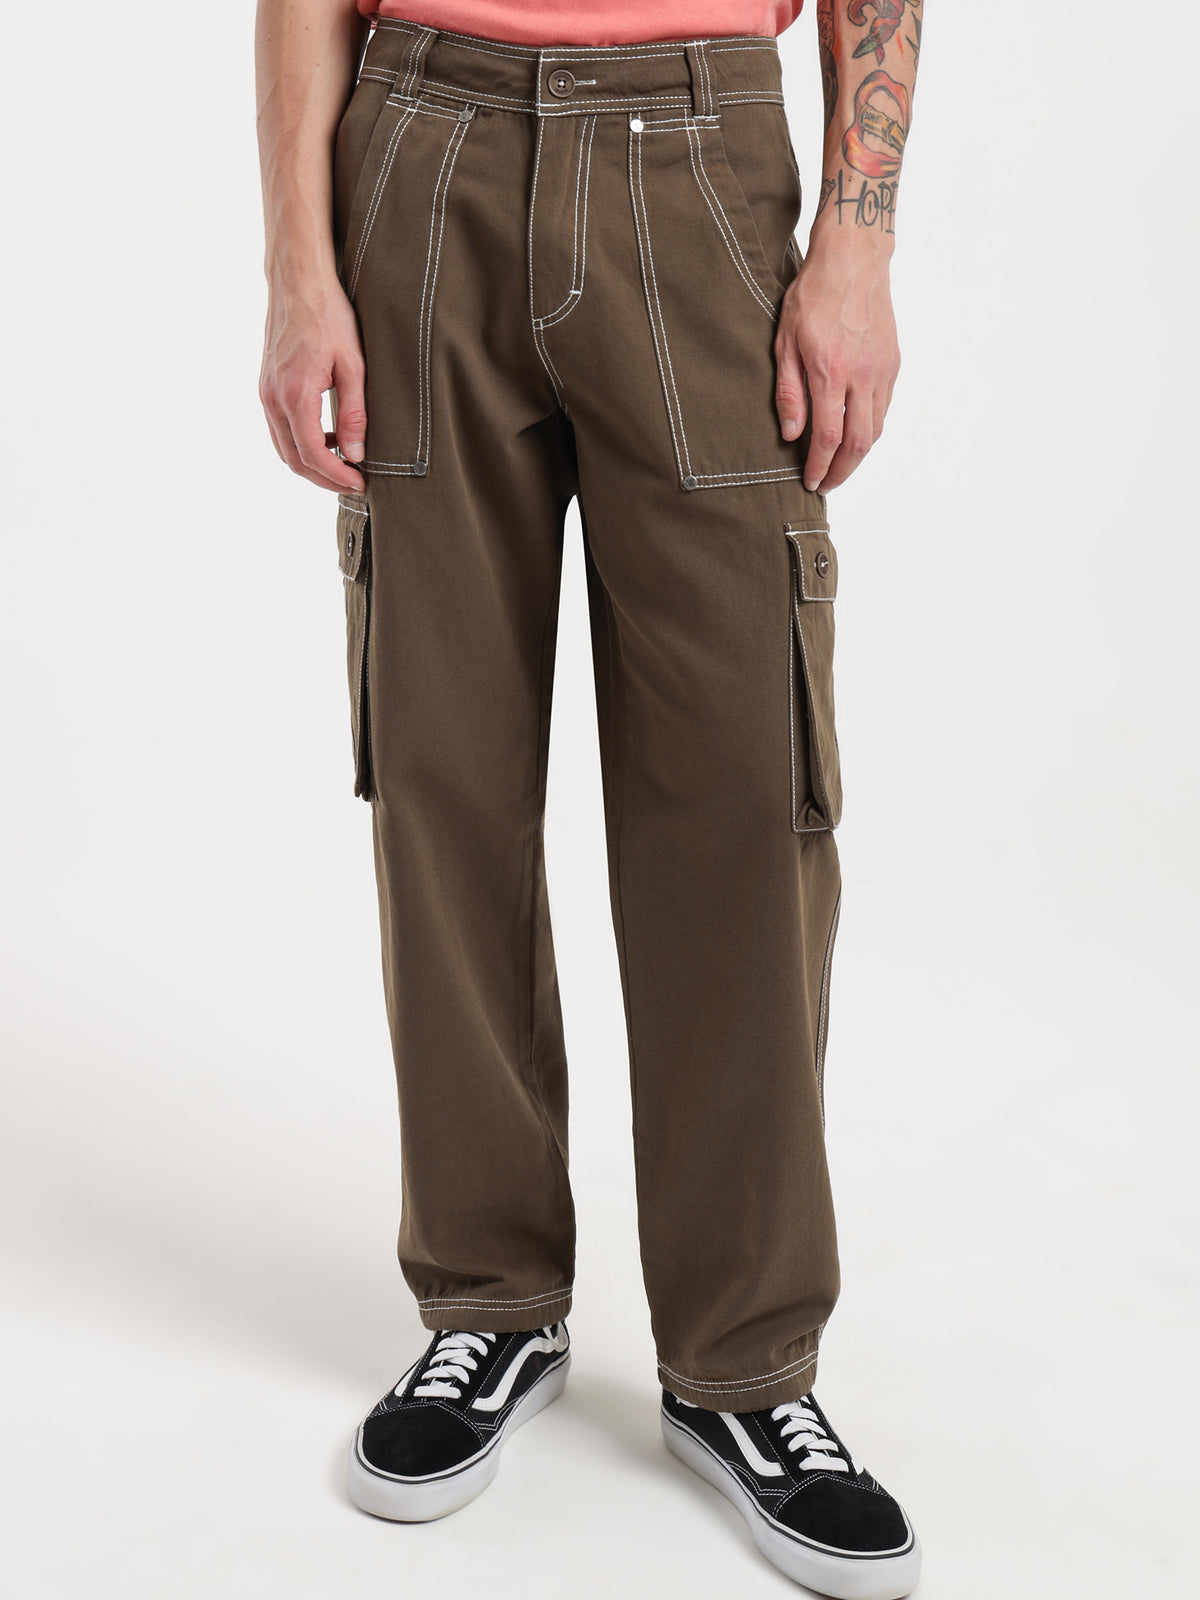 Syndicate Cargo Pants in Chocolate